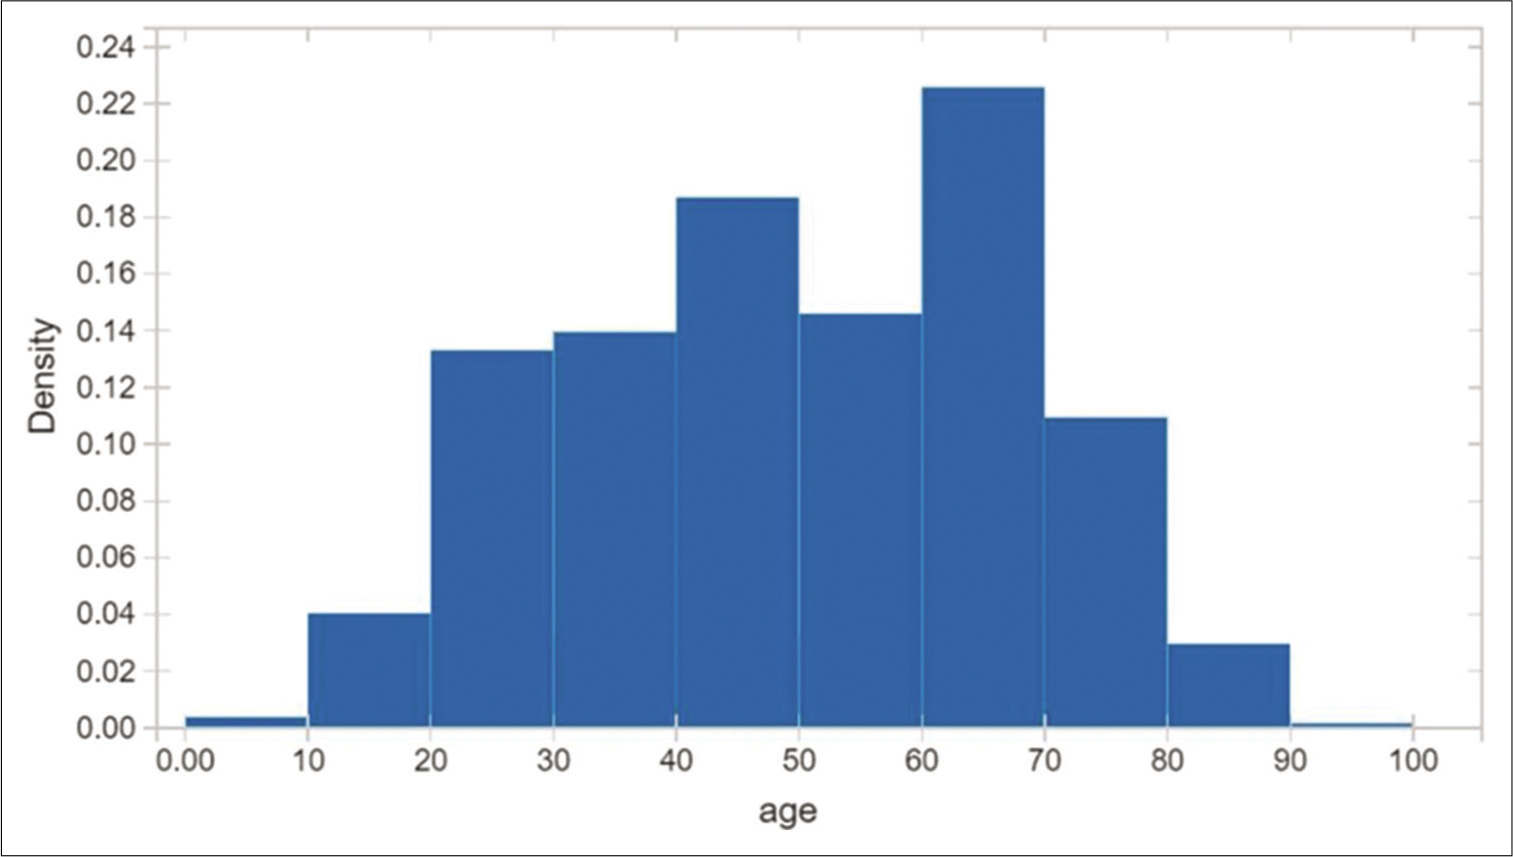 Age distribution is fairly normal, 75 percentile over 65 years old.